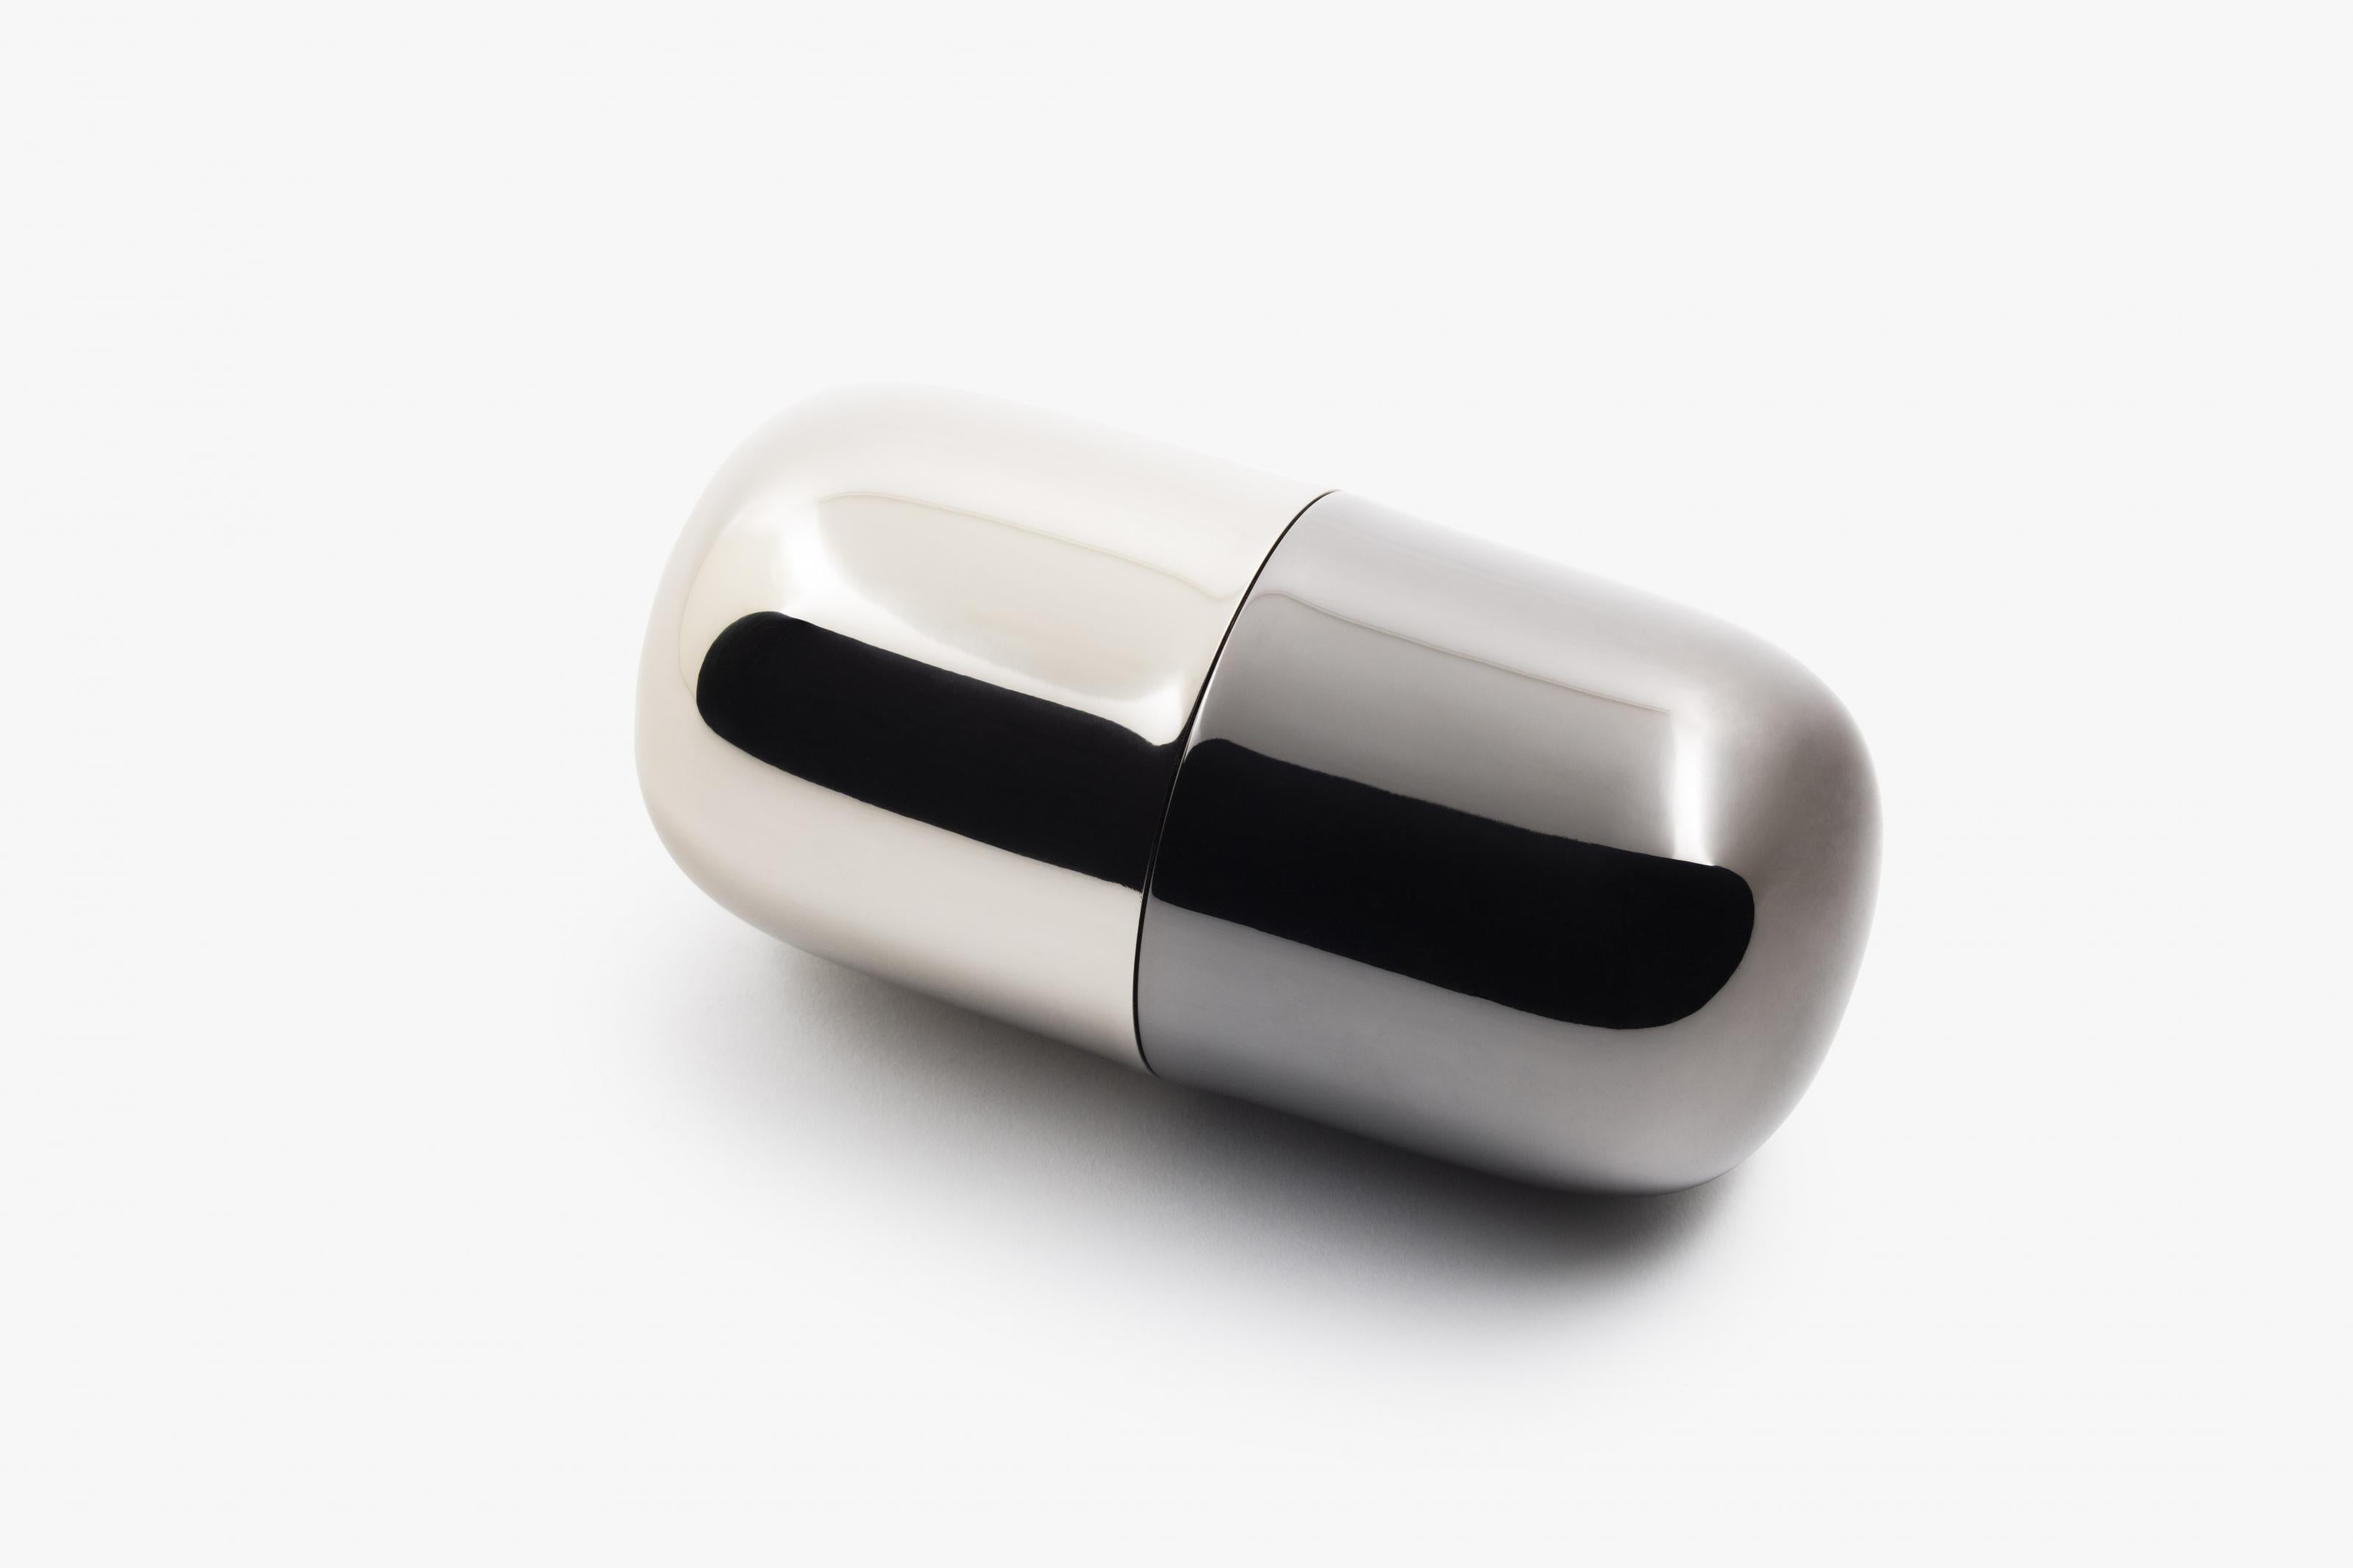 Brazilian Capsula Nickel and Onyx by Decarvalho Atelier For Sale